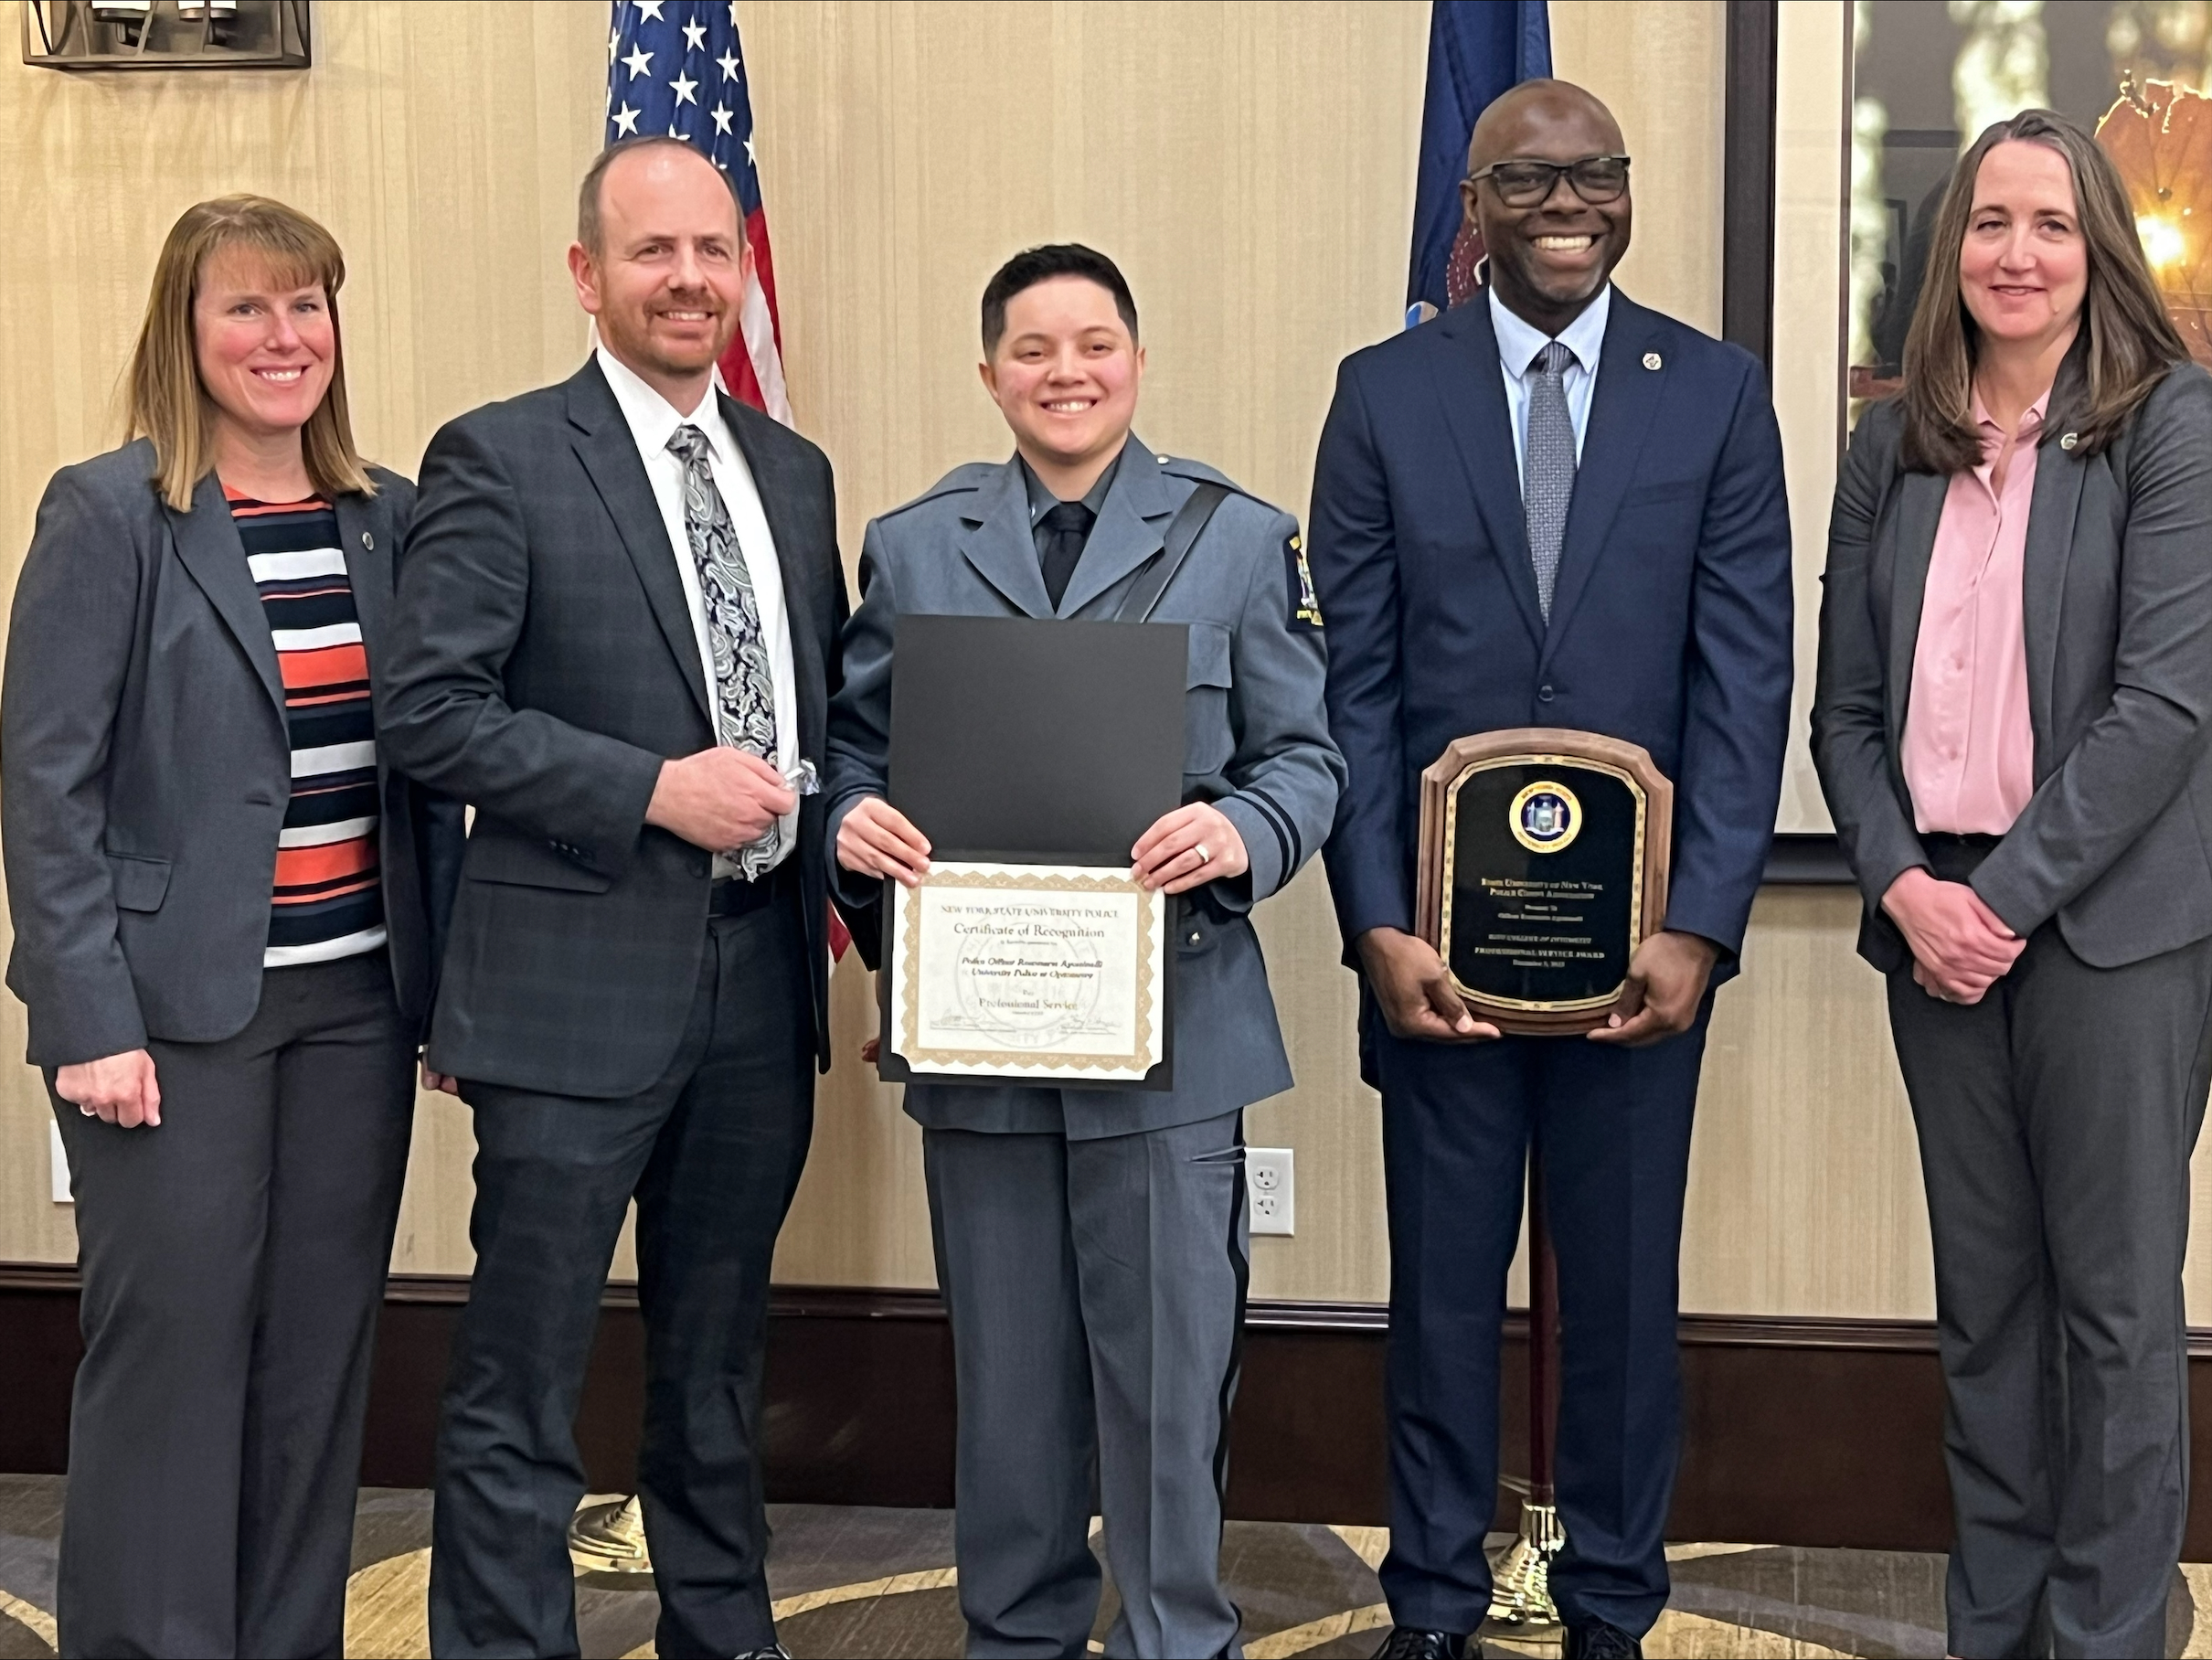 SUNY COLLEGE OF OPTOMETRY UNIVERSITY POLICE OFFICER HONORED WITH PROFESSIONAL SERVICE AWARD